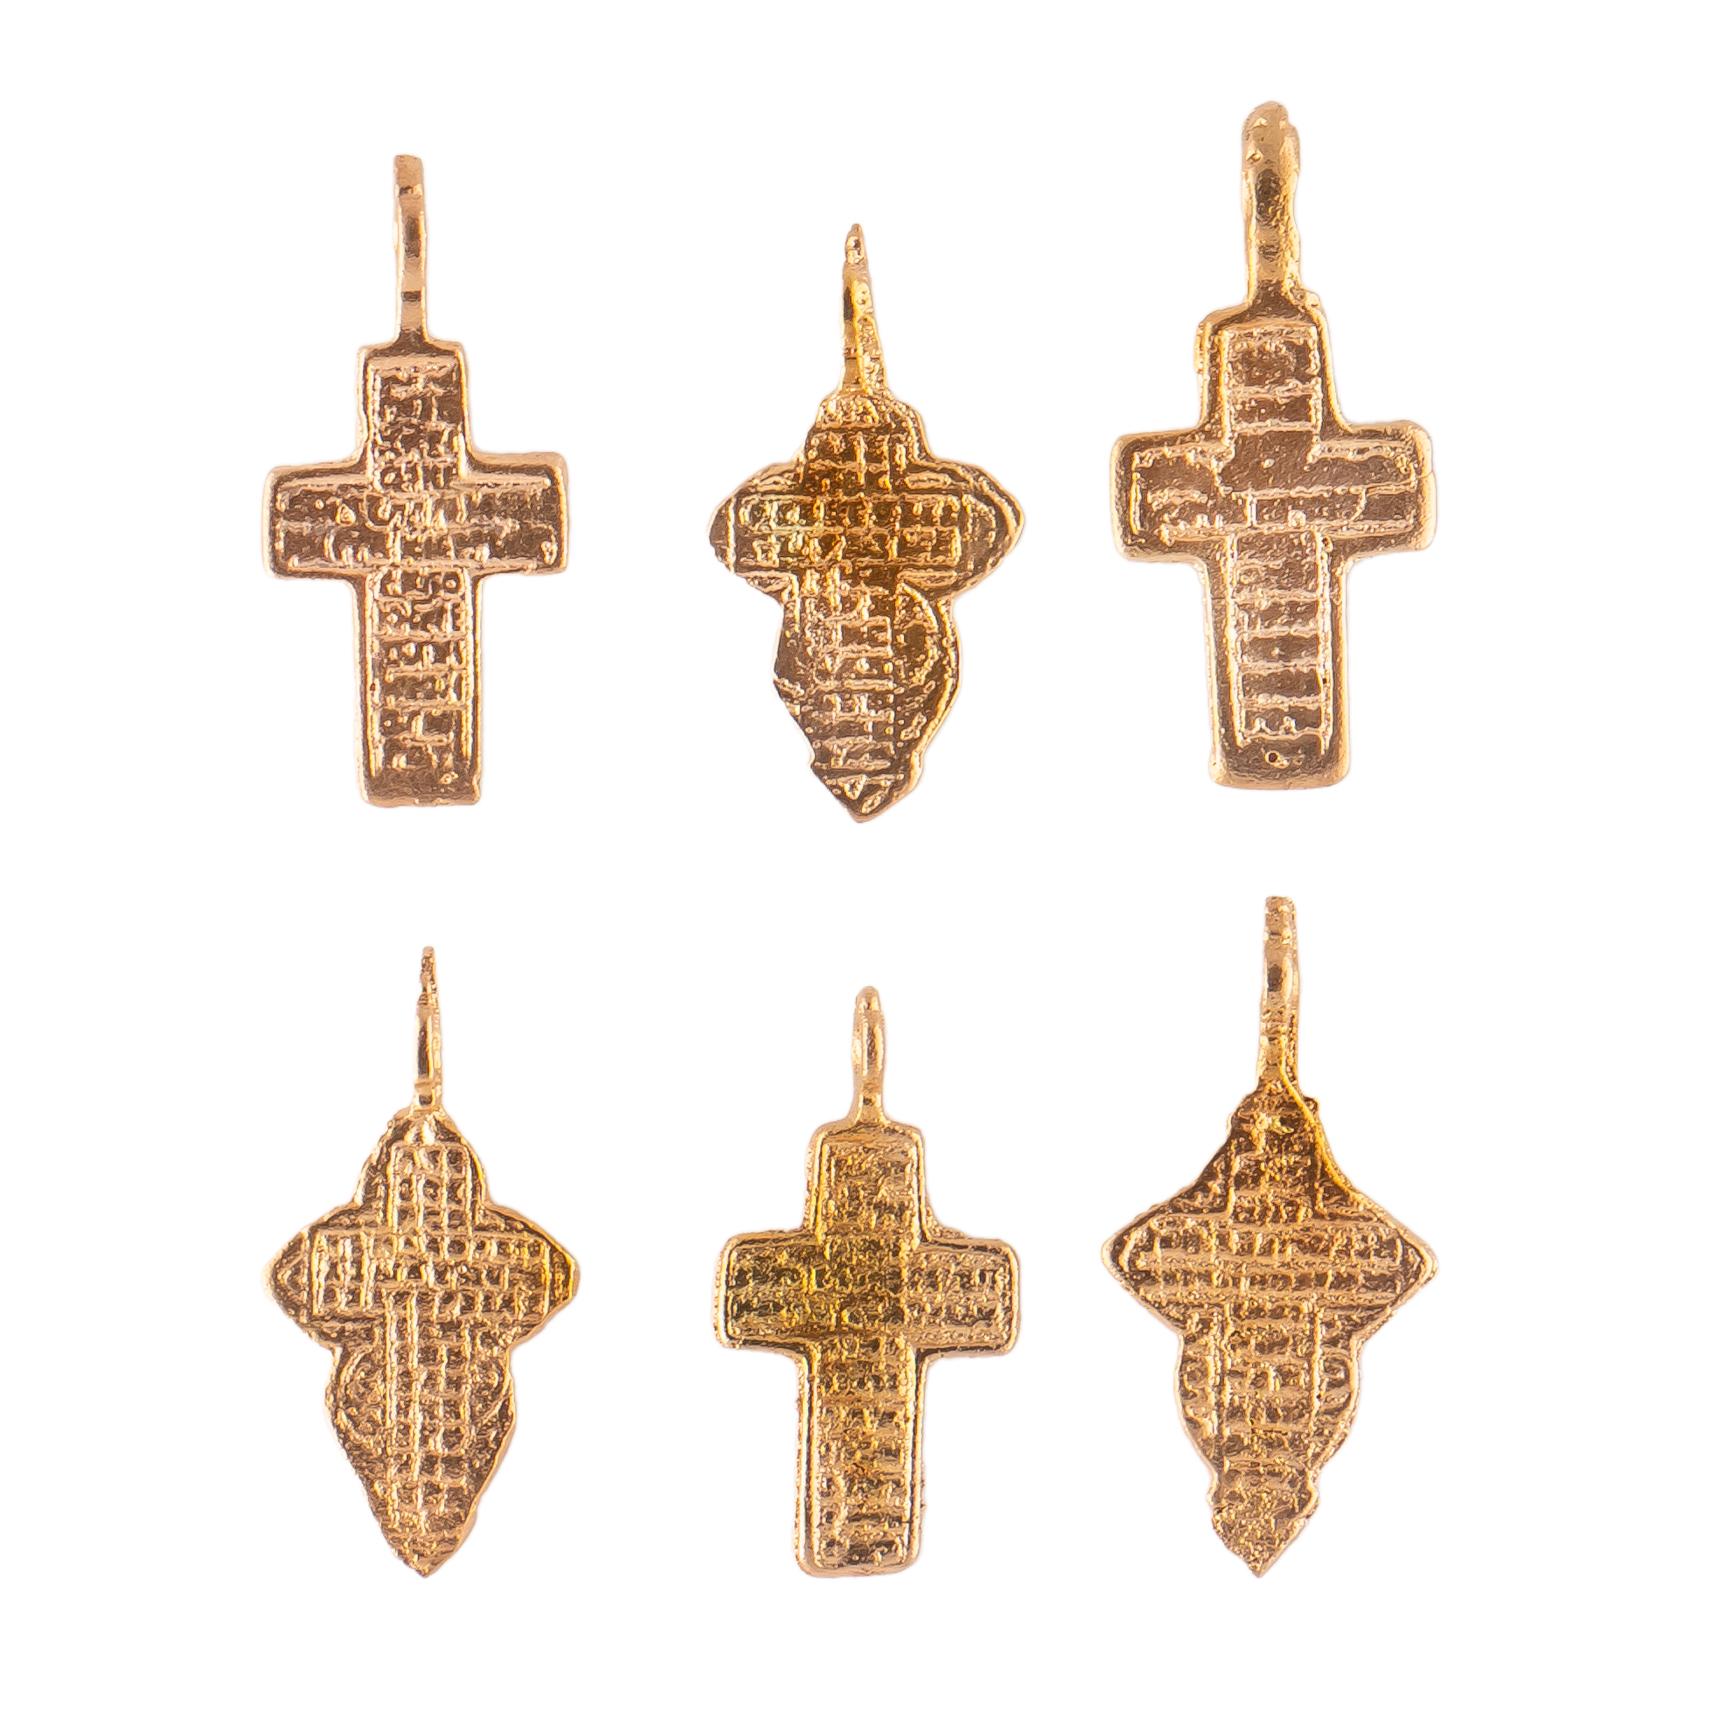 A group of rare gilded Russian Old Believers’ pendant crosses from the era of the Romanovs. Each with stamped religious motifs including a Russian Orthodox cross on the front and an inscription in the back (illegible). Traditionally the inscription